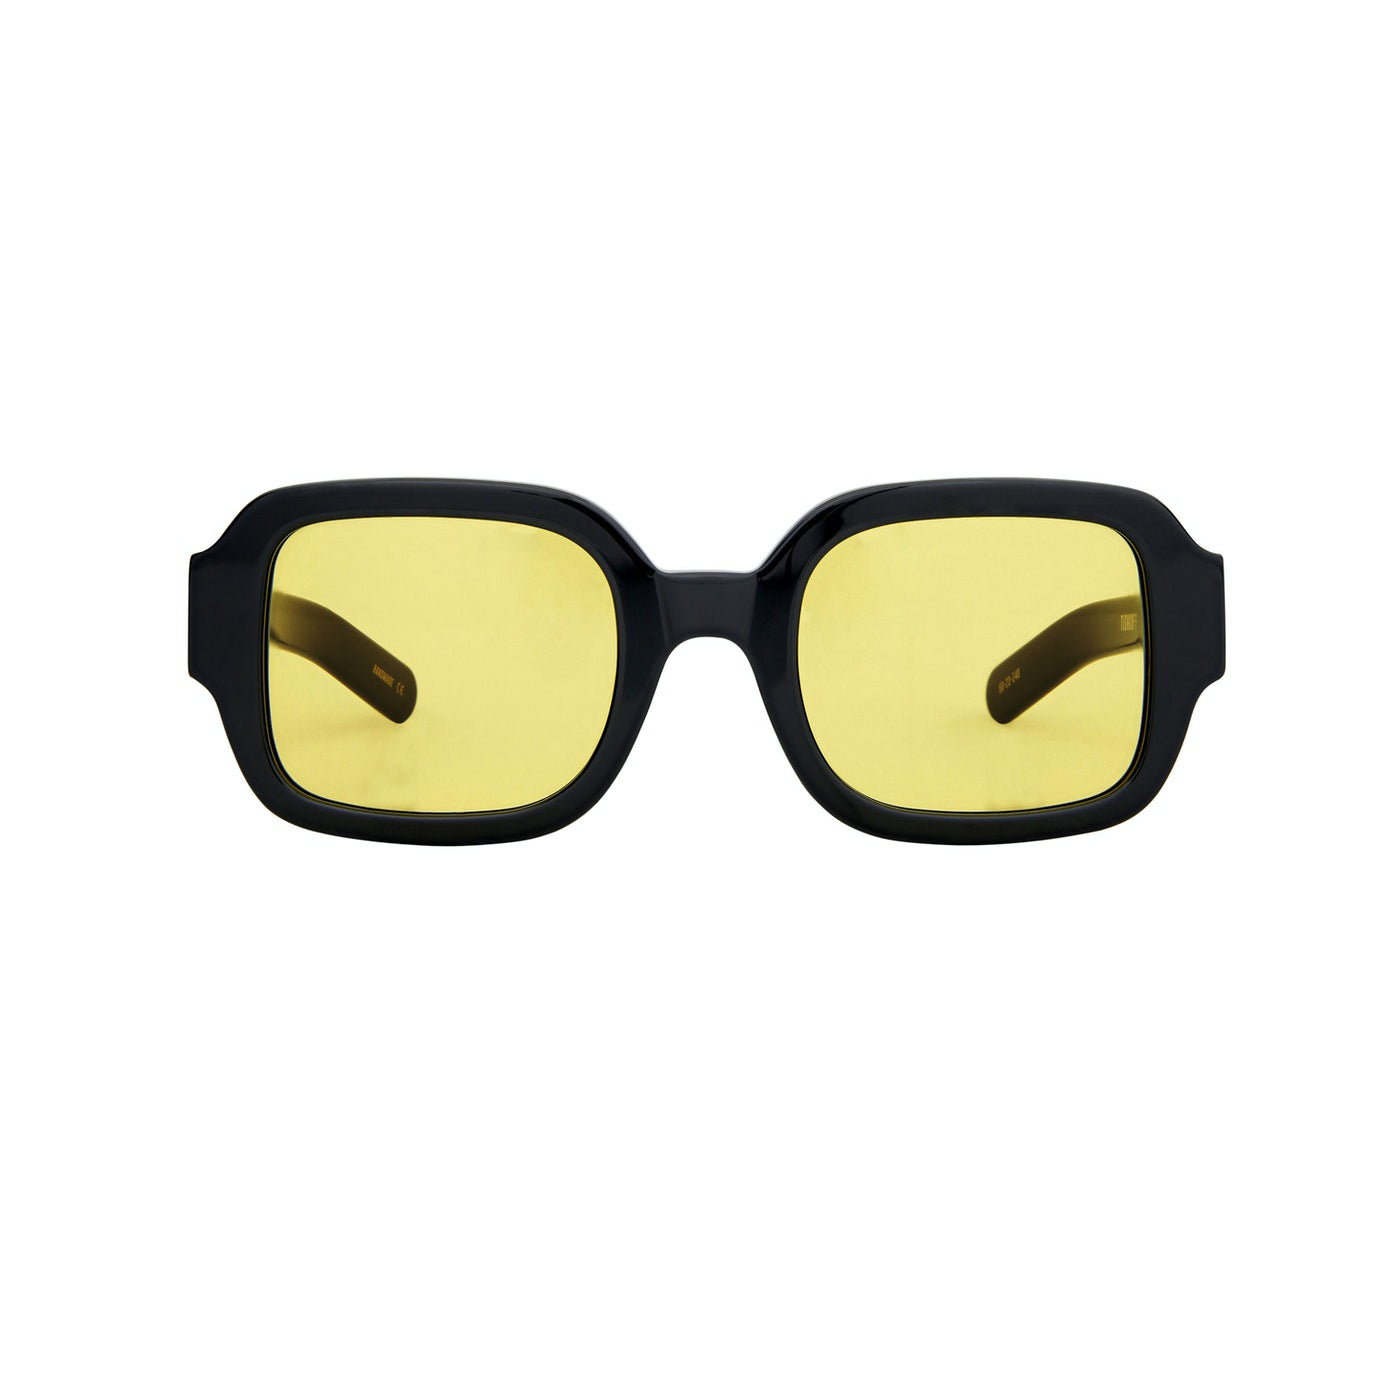 Tishkoff - Solid Black / Solid Yellow Lens